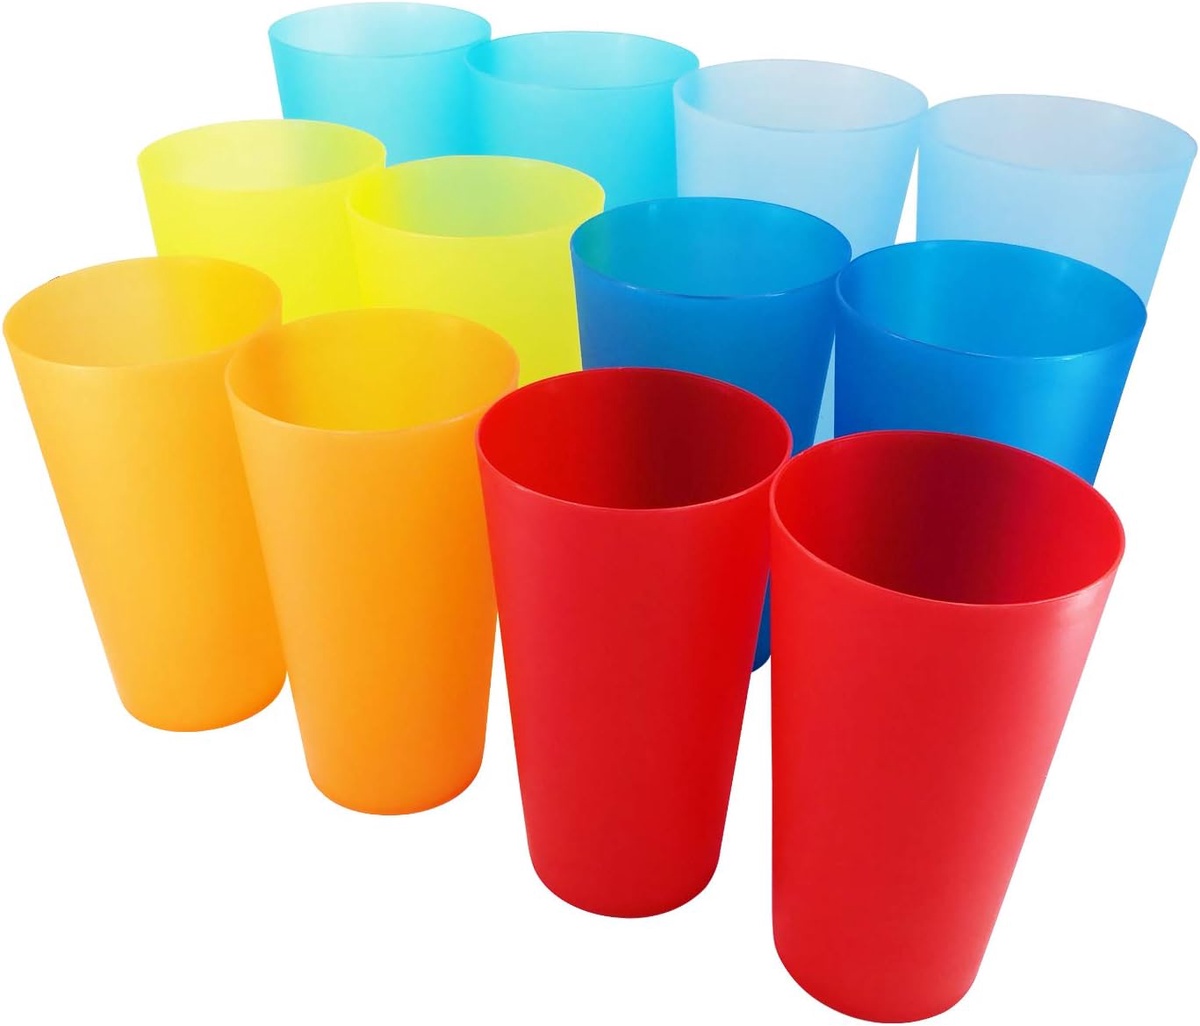 Clear Plastic Tumblers: A Comprehensive Guide